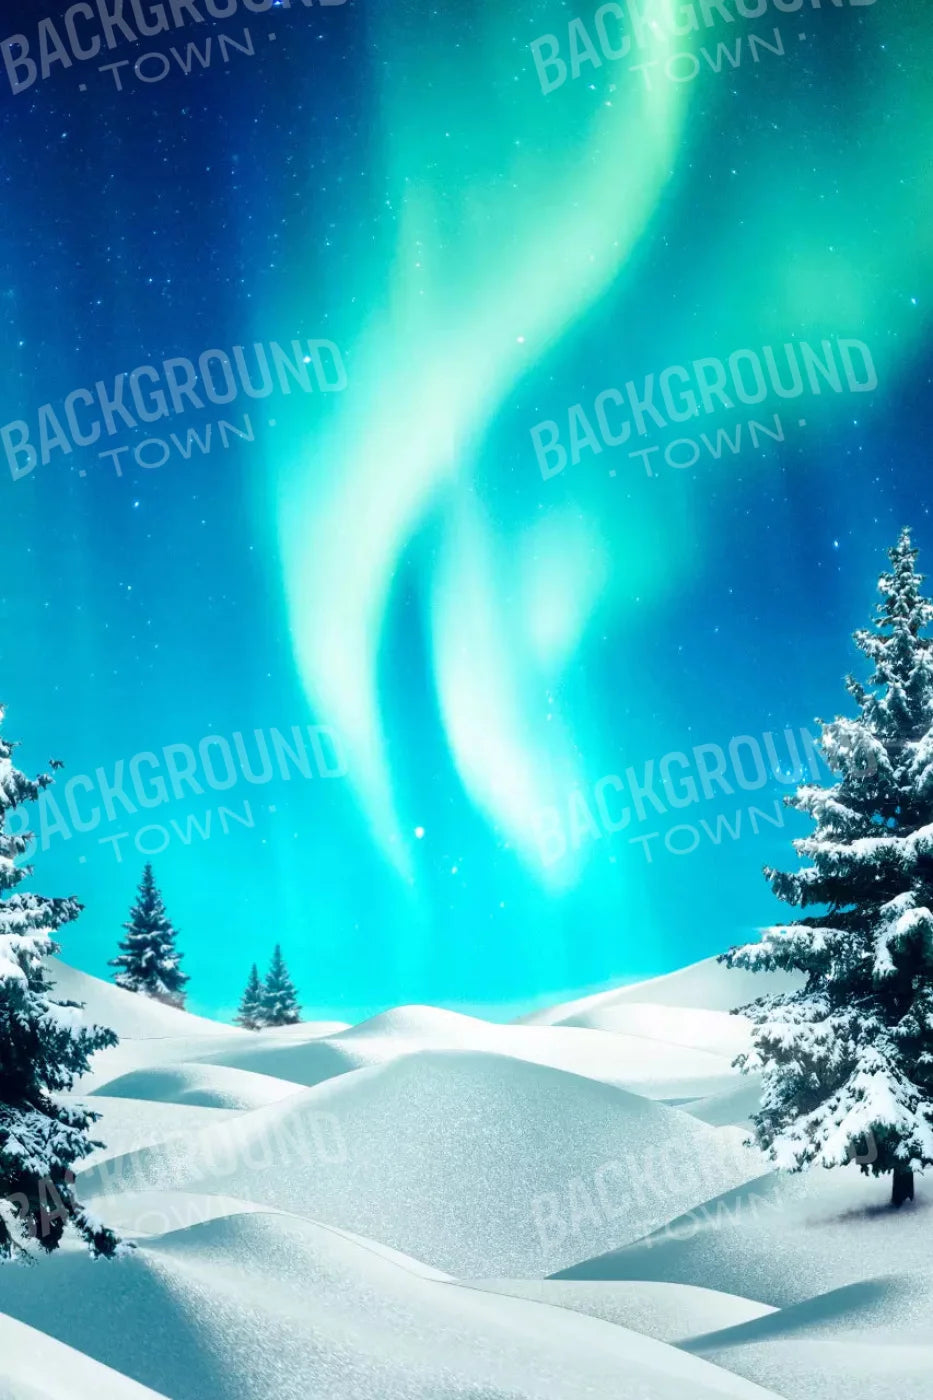 North Pole For Lvl Up Backdrop System 5X76 Up ( 60 X 90 Inch )